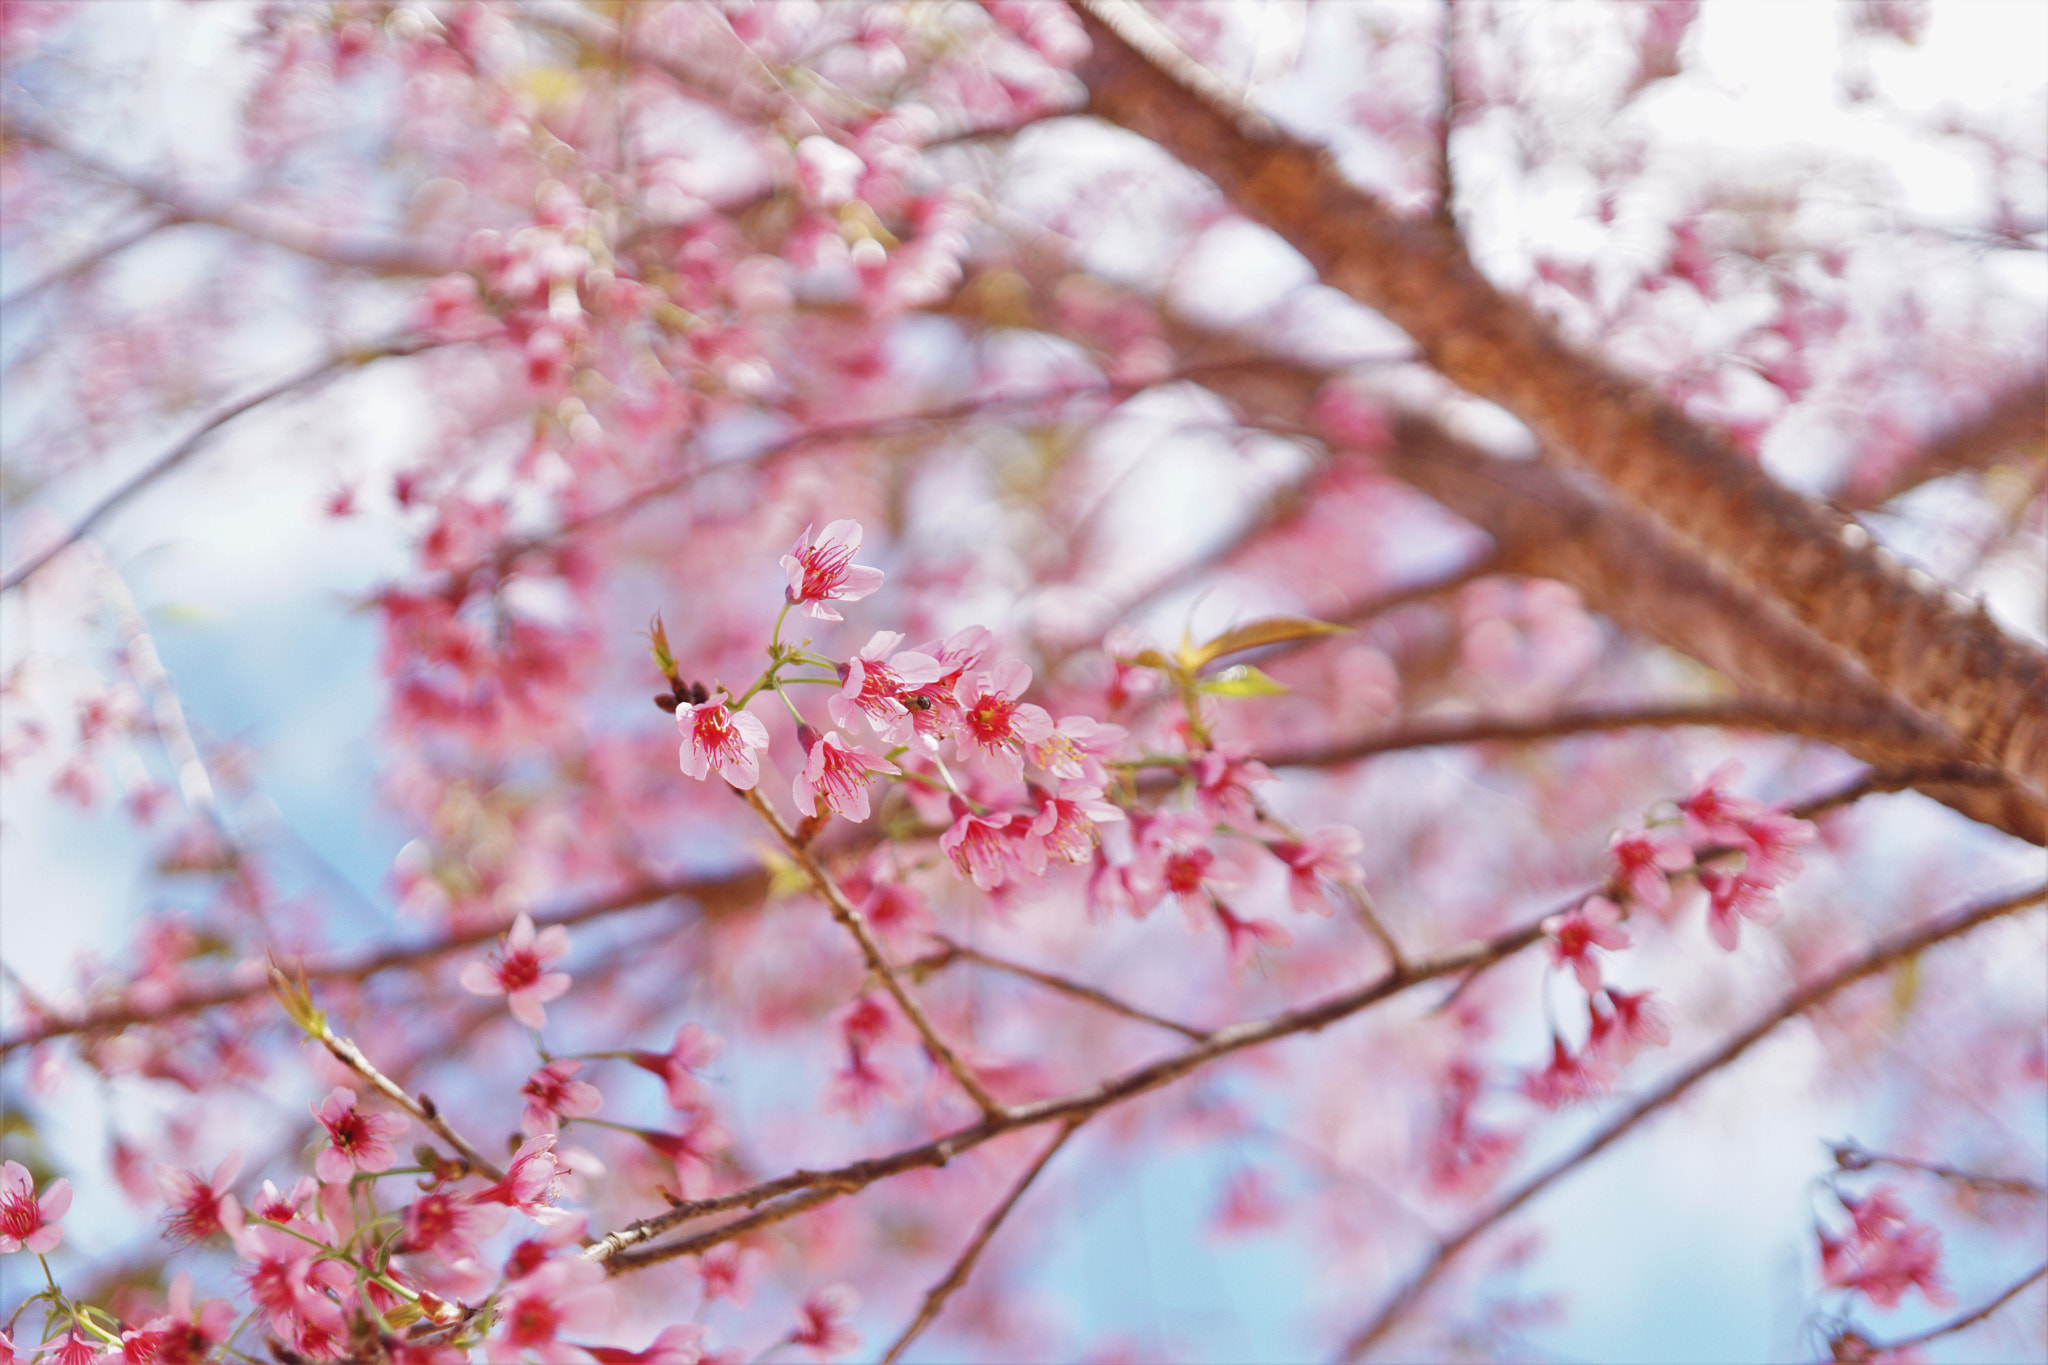 ZEISS Touit 32mm F1.8 sample photo. Cherry blossom photography